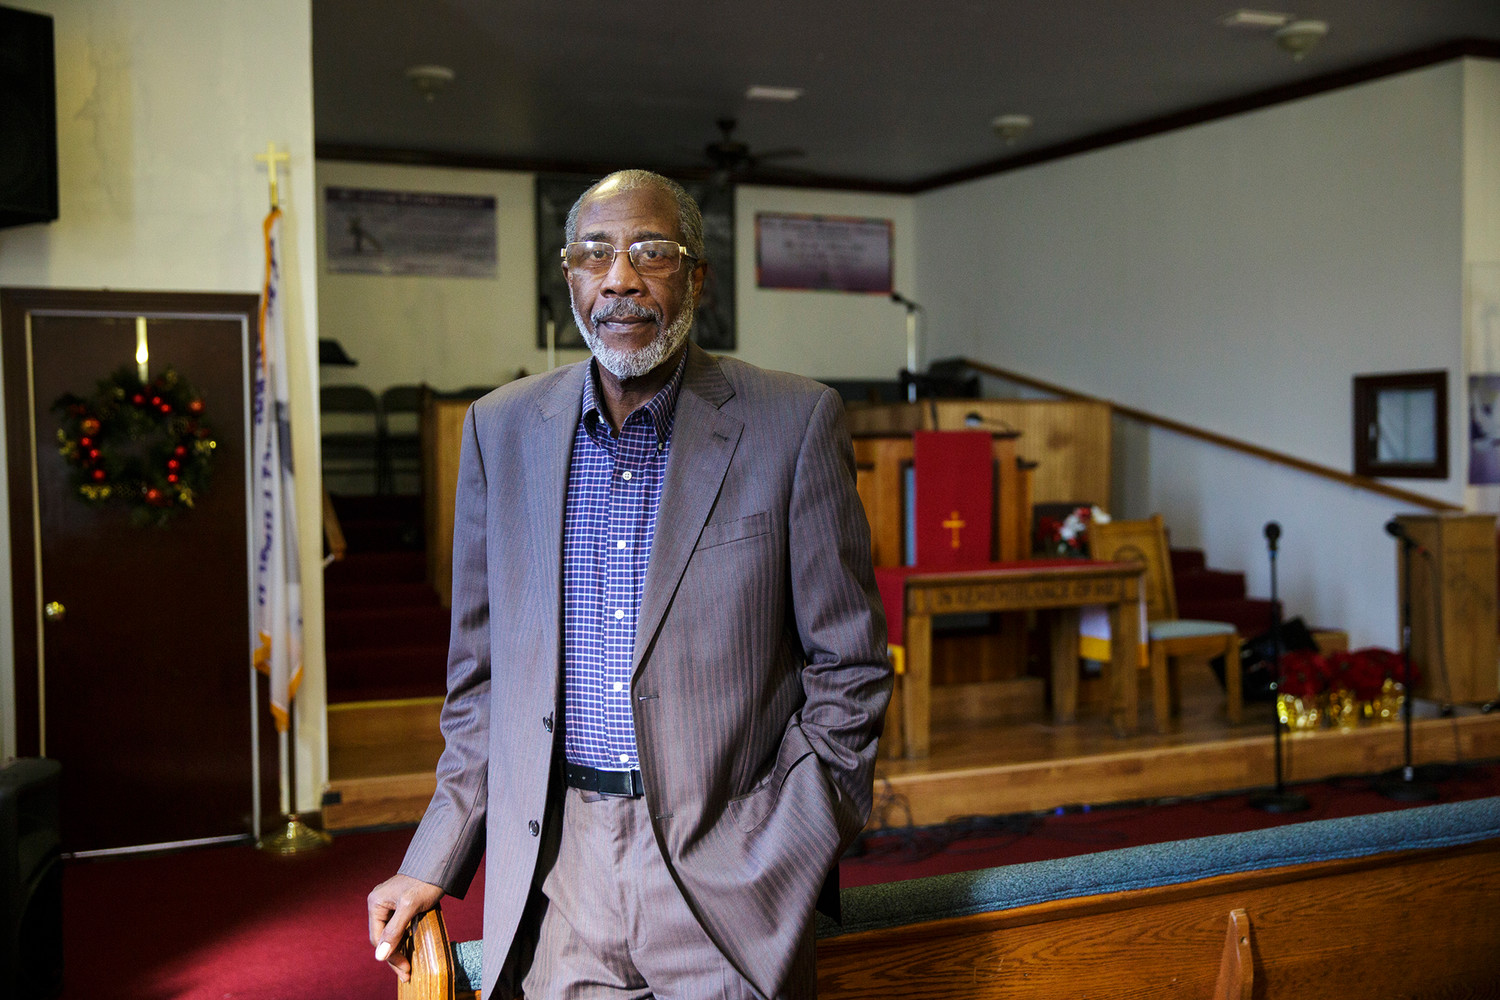 The Rev. William Randall of St. Simon Baptist Church in Orange Park will host a four-day weekend of events surrounding Martin Luther King Jr. Day and focusing on raising funds for foster children statewide.